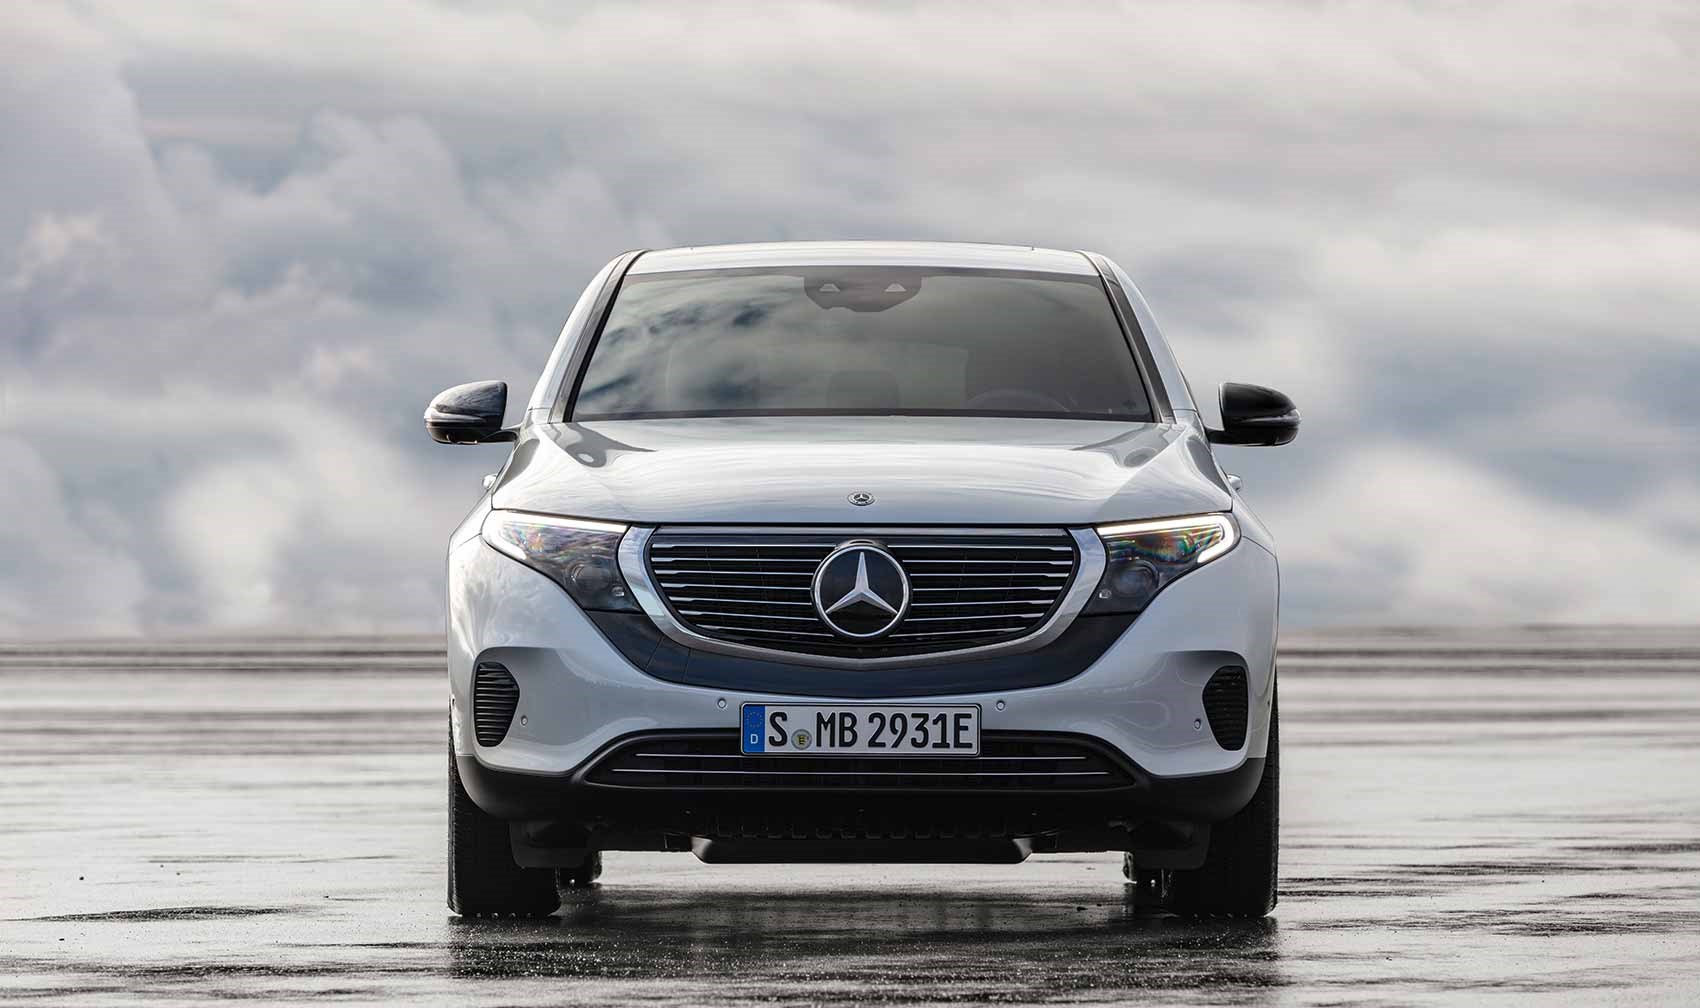 Mercedes EQC: production begins as UK prices announced